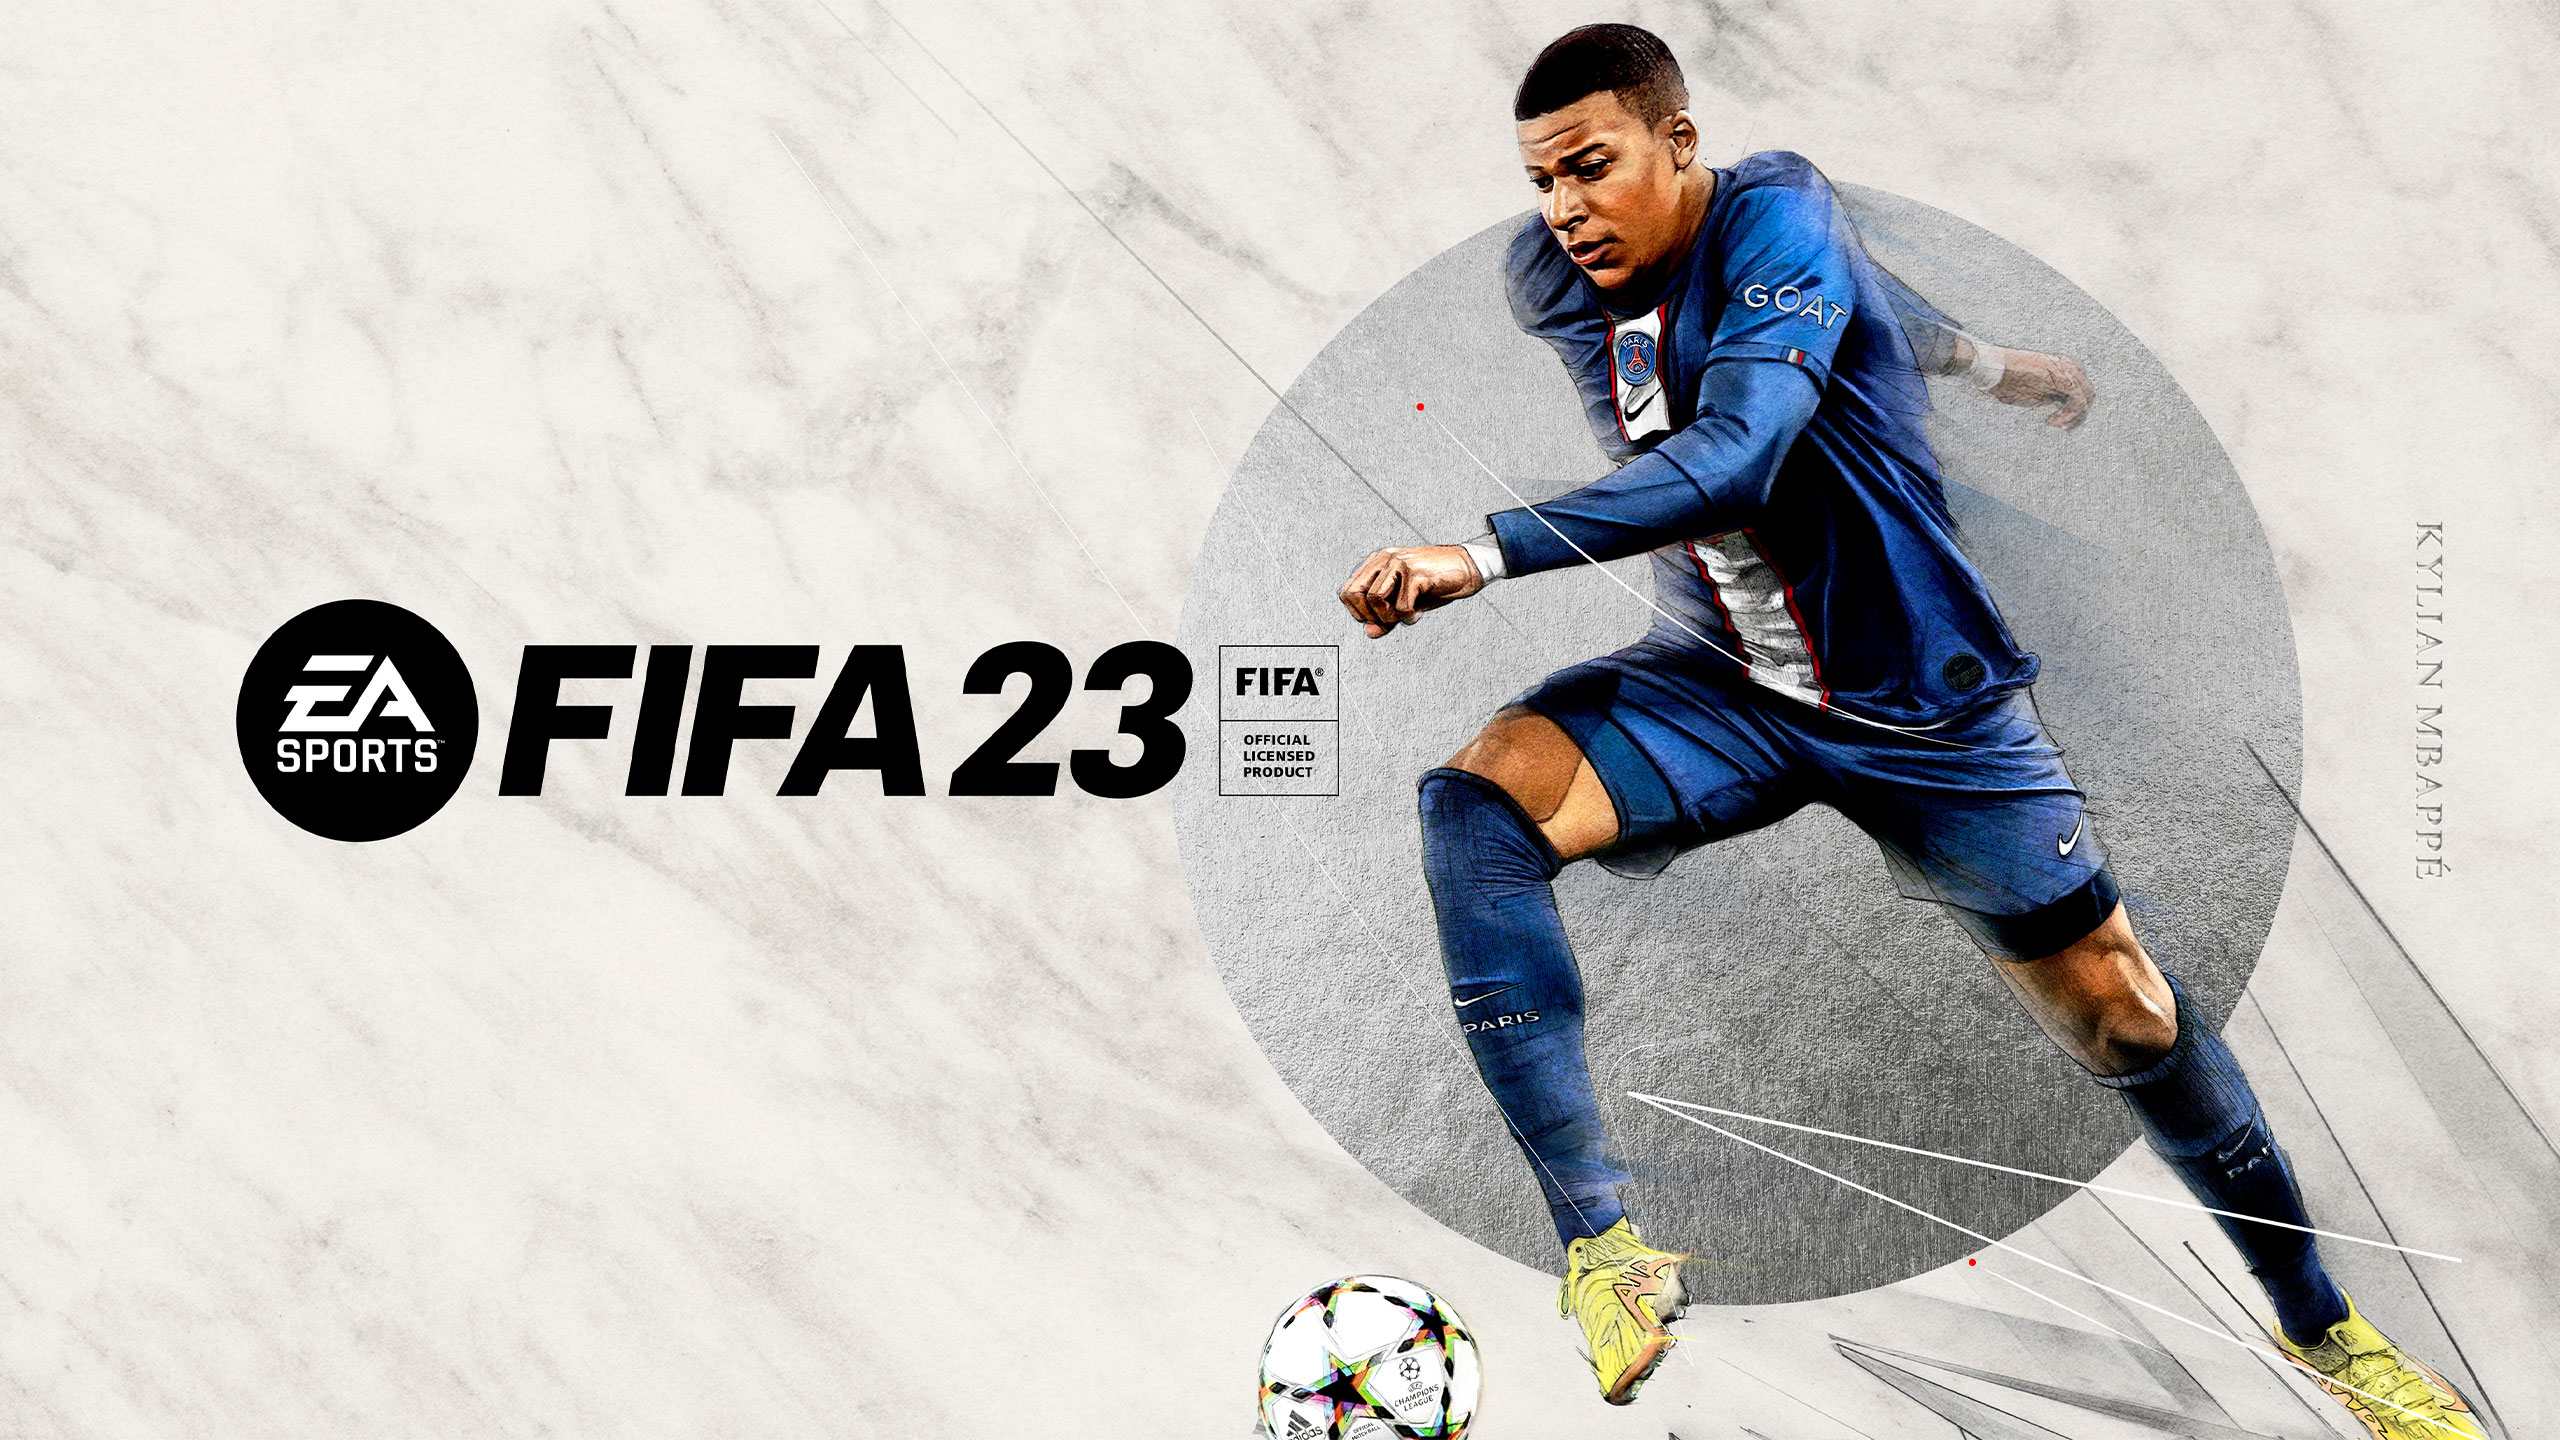 FUT 23 web app release date, when and how to download app for FIFA?